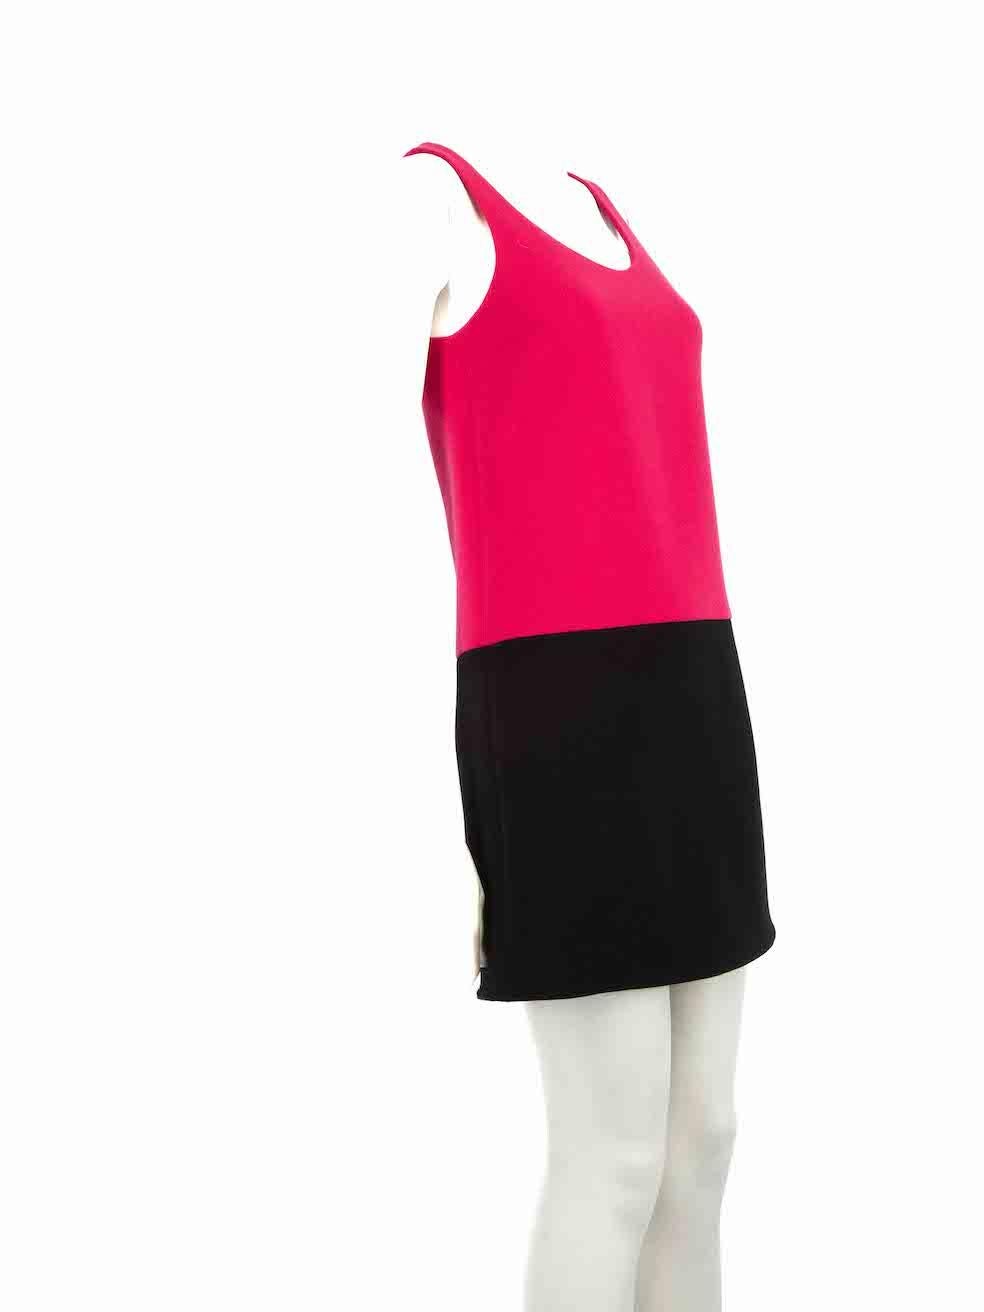 CONDITION is Very good. Hardly any visible wear to dress is evident on this used Saint Laurent designer resale item.
 
 Details
 Multicolour- pink, black
 Wool
 Shift dress
 Sleeveless
 Knee length
 Round neck
 Side zip fastening
 
 
 Made in Italy
